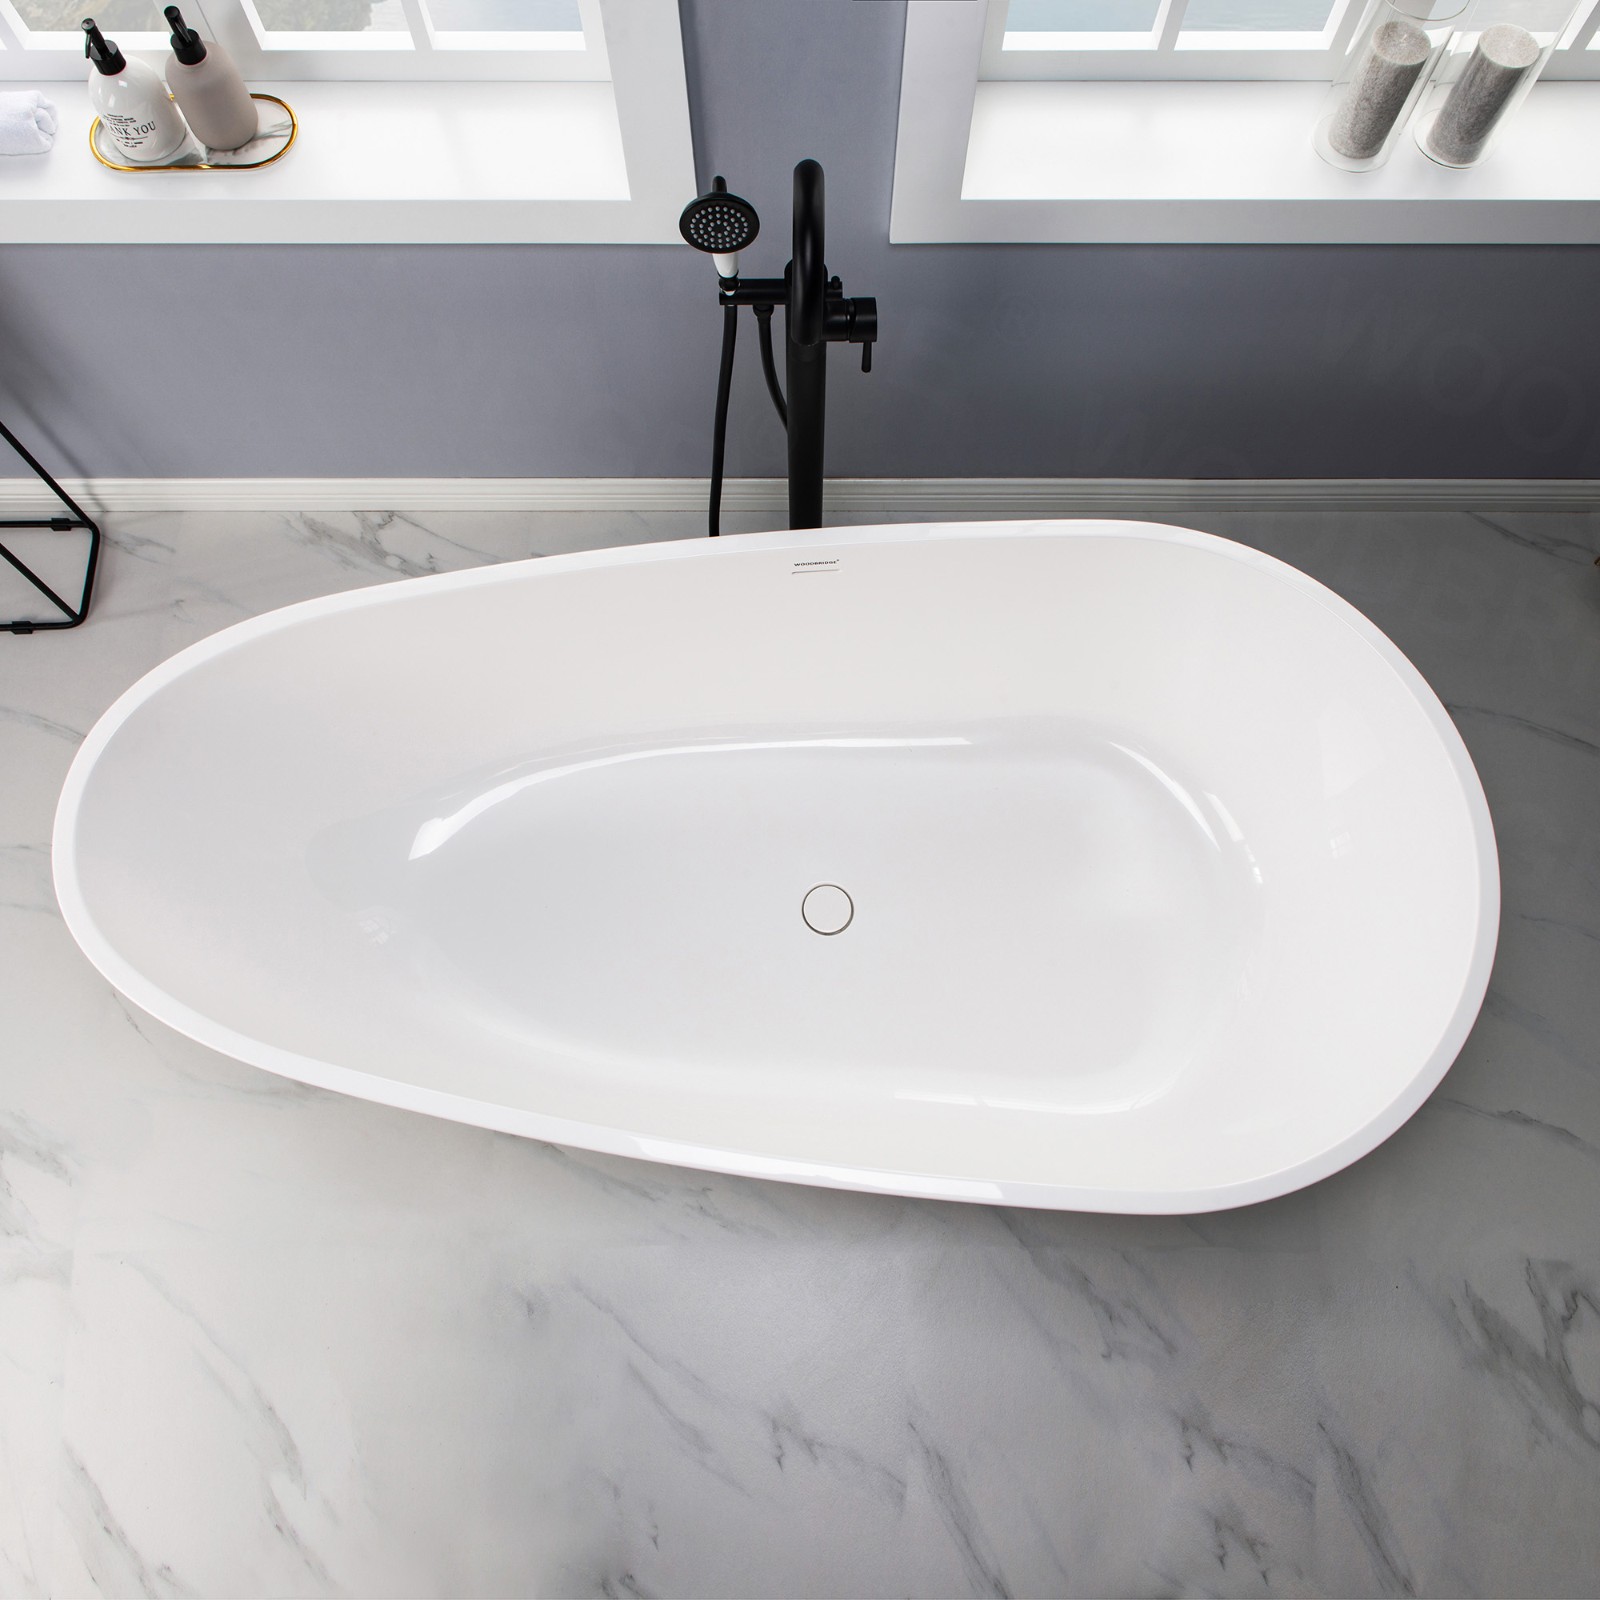  WOODBRIDGE 67 in. Freestanding Double Ended Solid Surface Soaking Bathtub with Center Drain Assembly and Overflow, B0050/BTA0050, Glossy White_8430